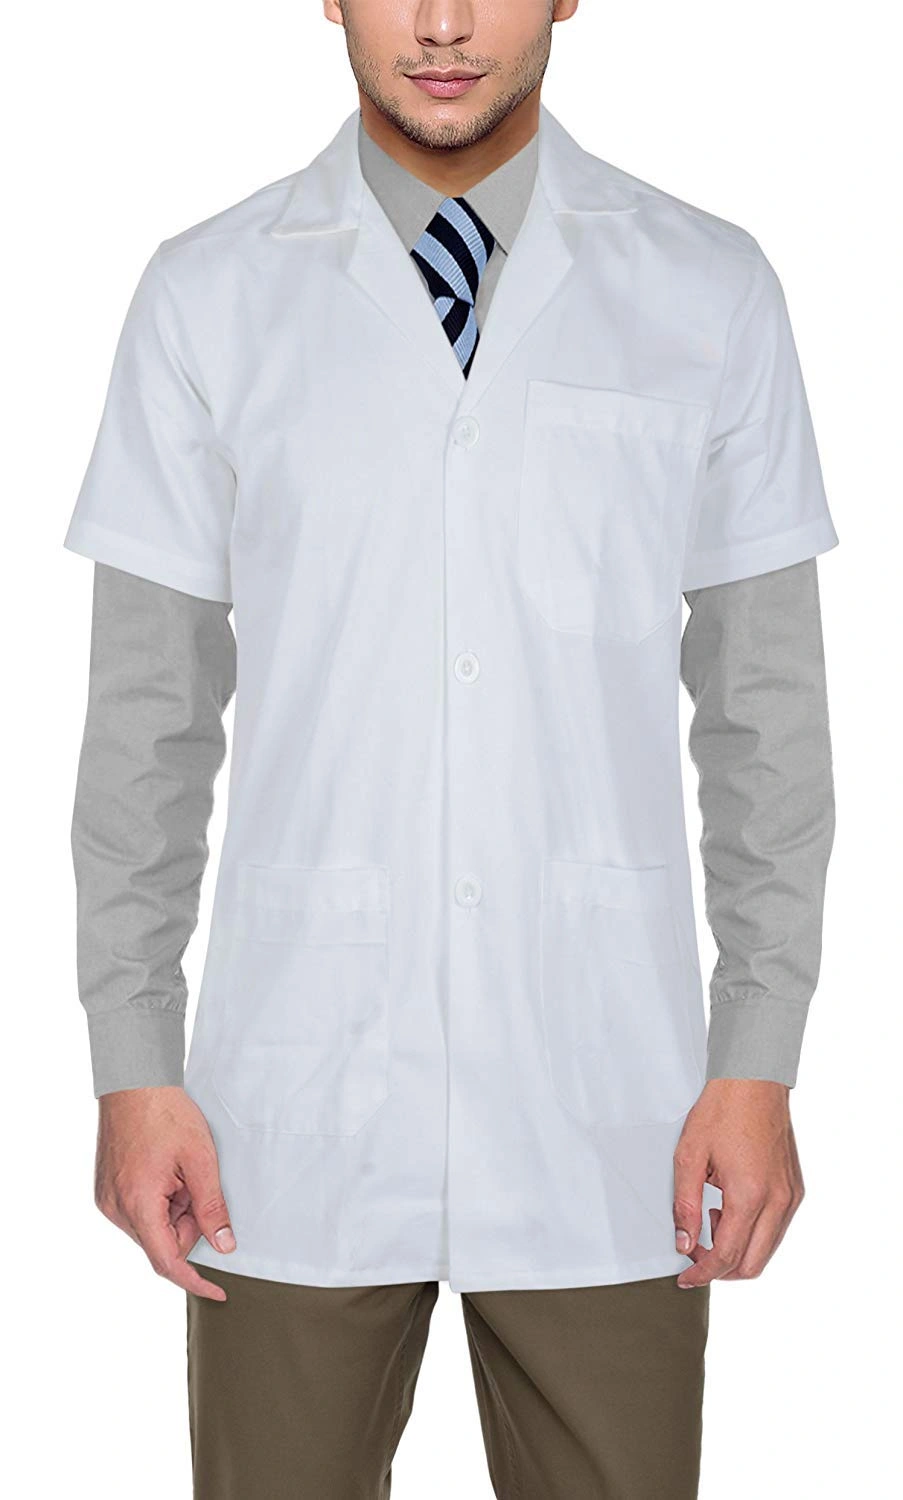 AAbha Short Sleeves Doctor Lab Coat Apron-White : Amazon.in: Health &  Personal Care